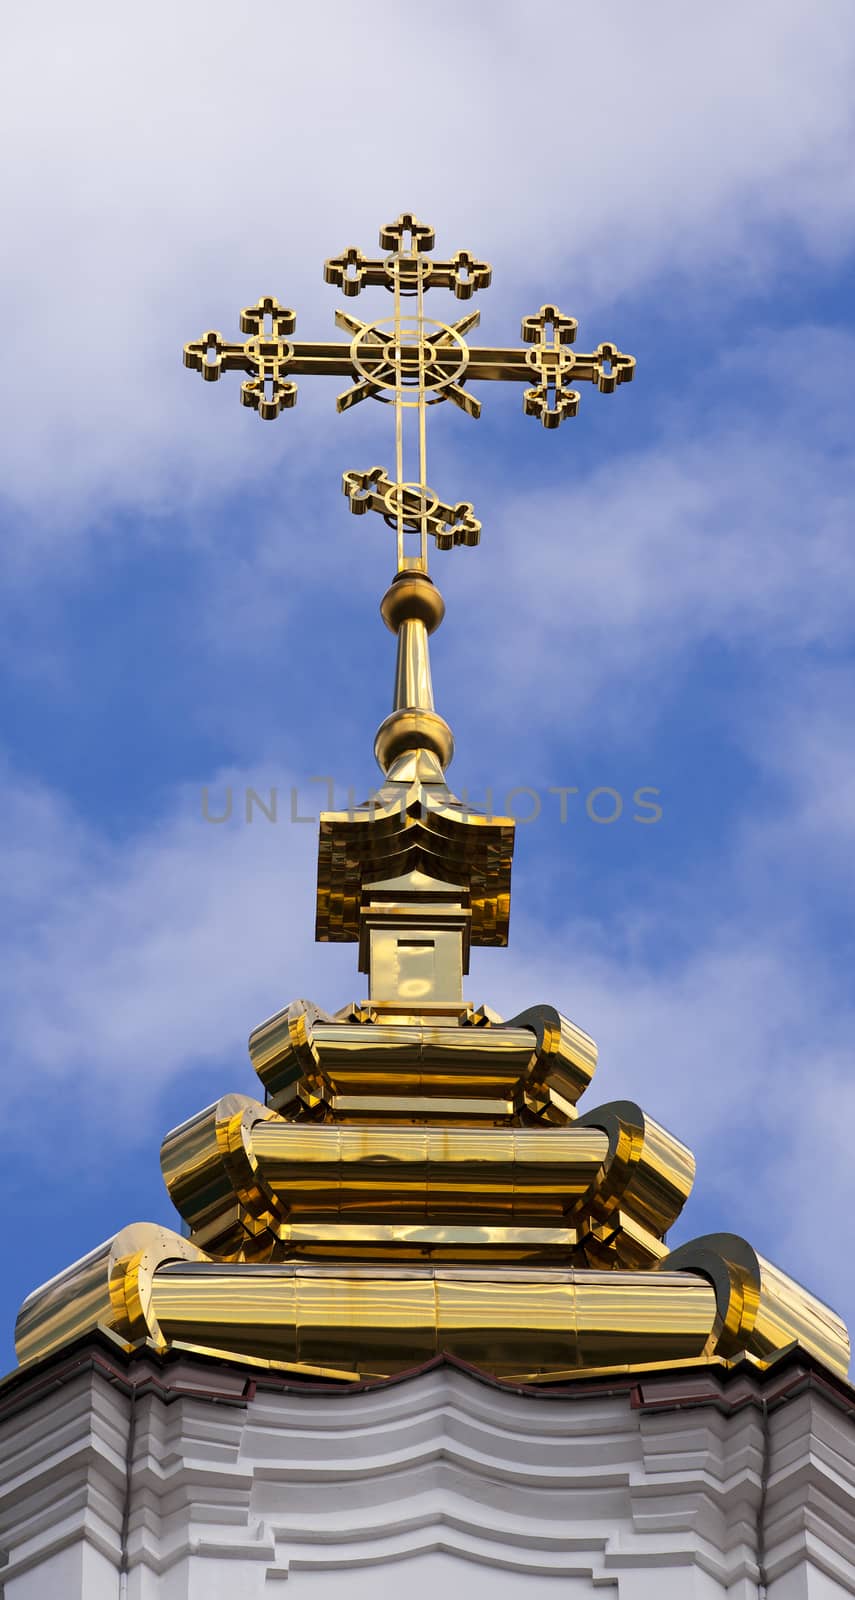   the gilded orthodox cross which is settling down on church